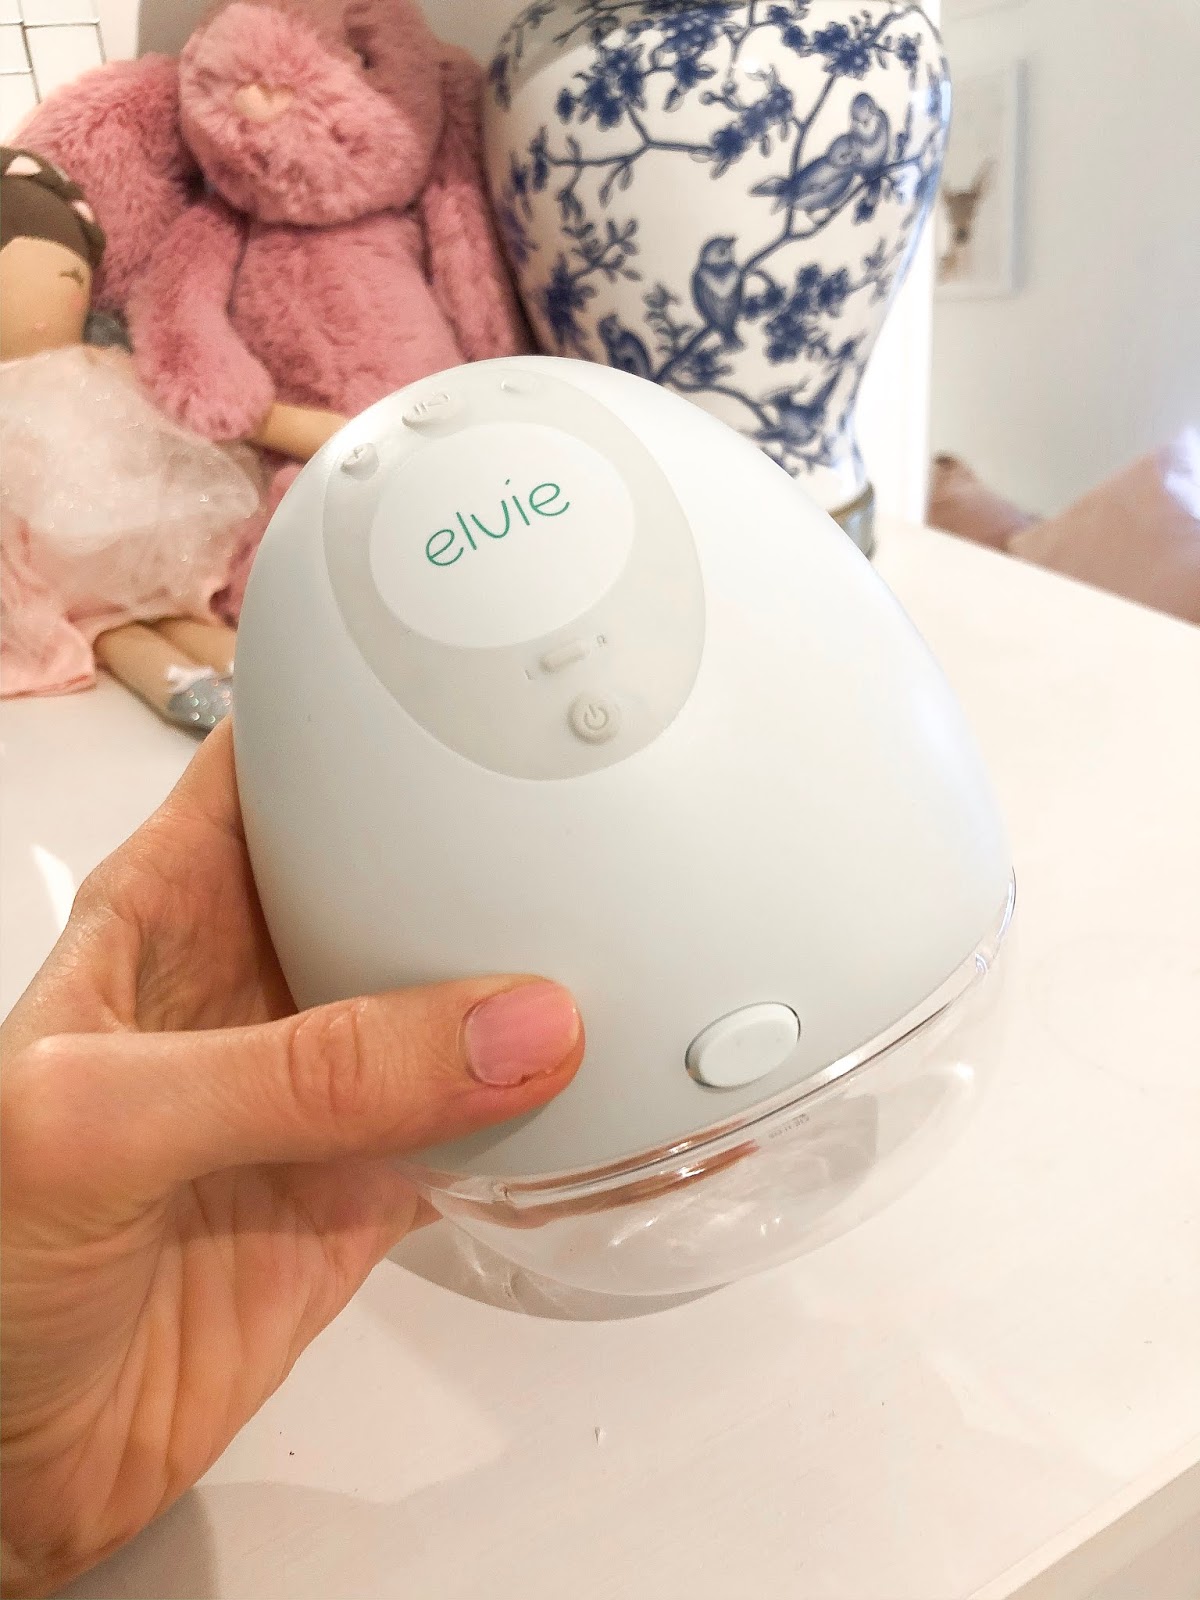 The Elvie Breast Pump Review / AD